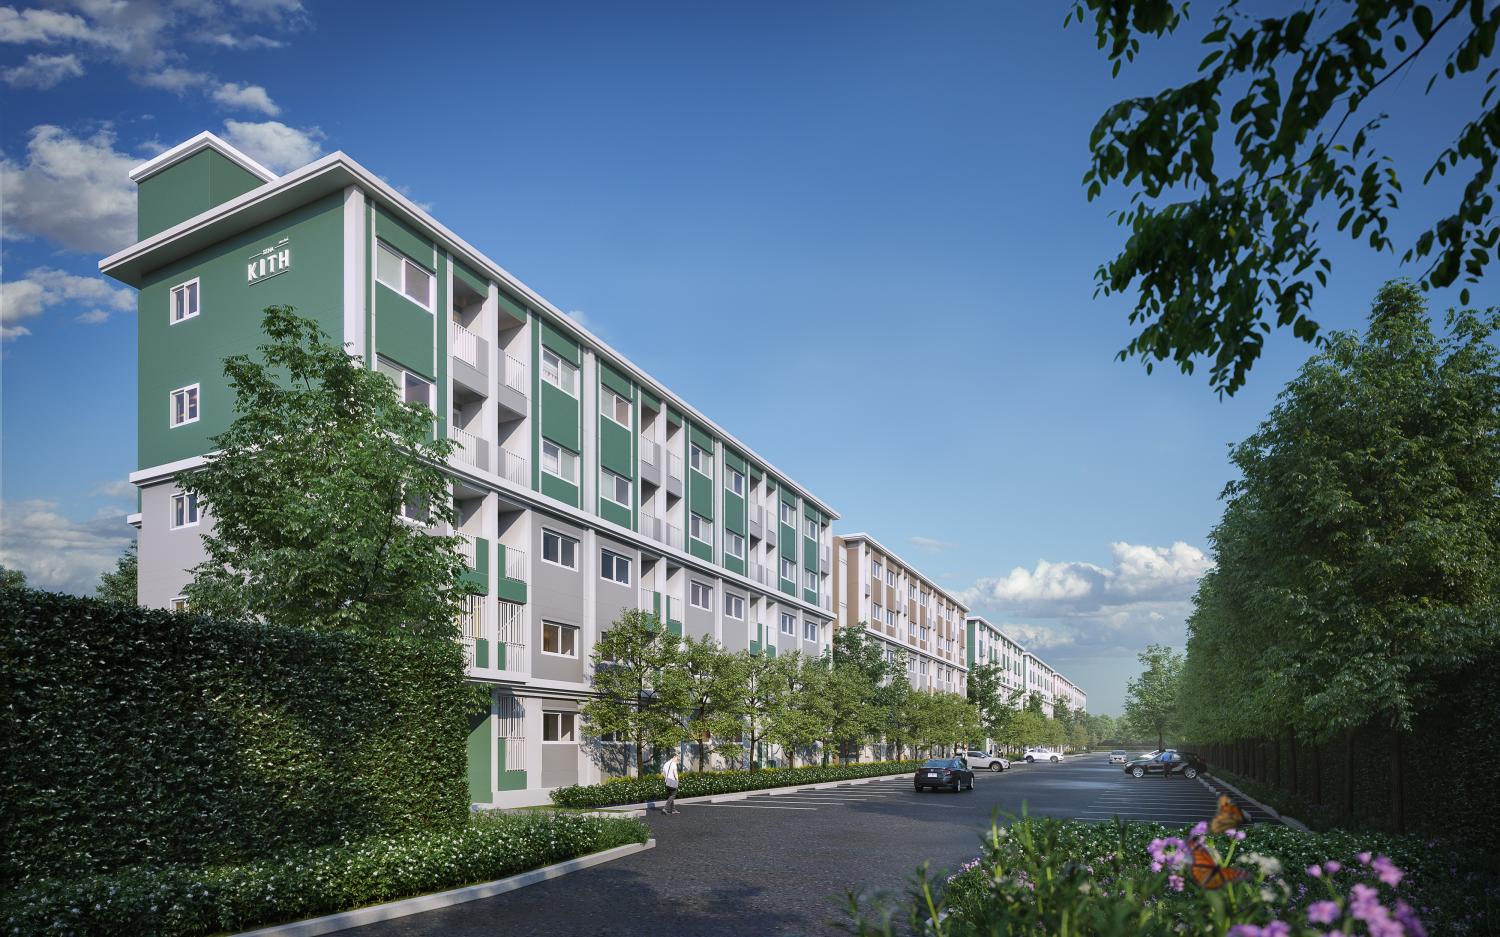 An artist's rendition of Sena Kith Thepharak-Bang Bo, a lower-priced condo project Sena Development launched last year with units priced from 800,000 baht.